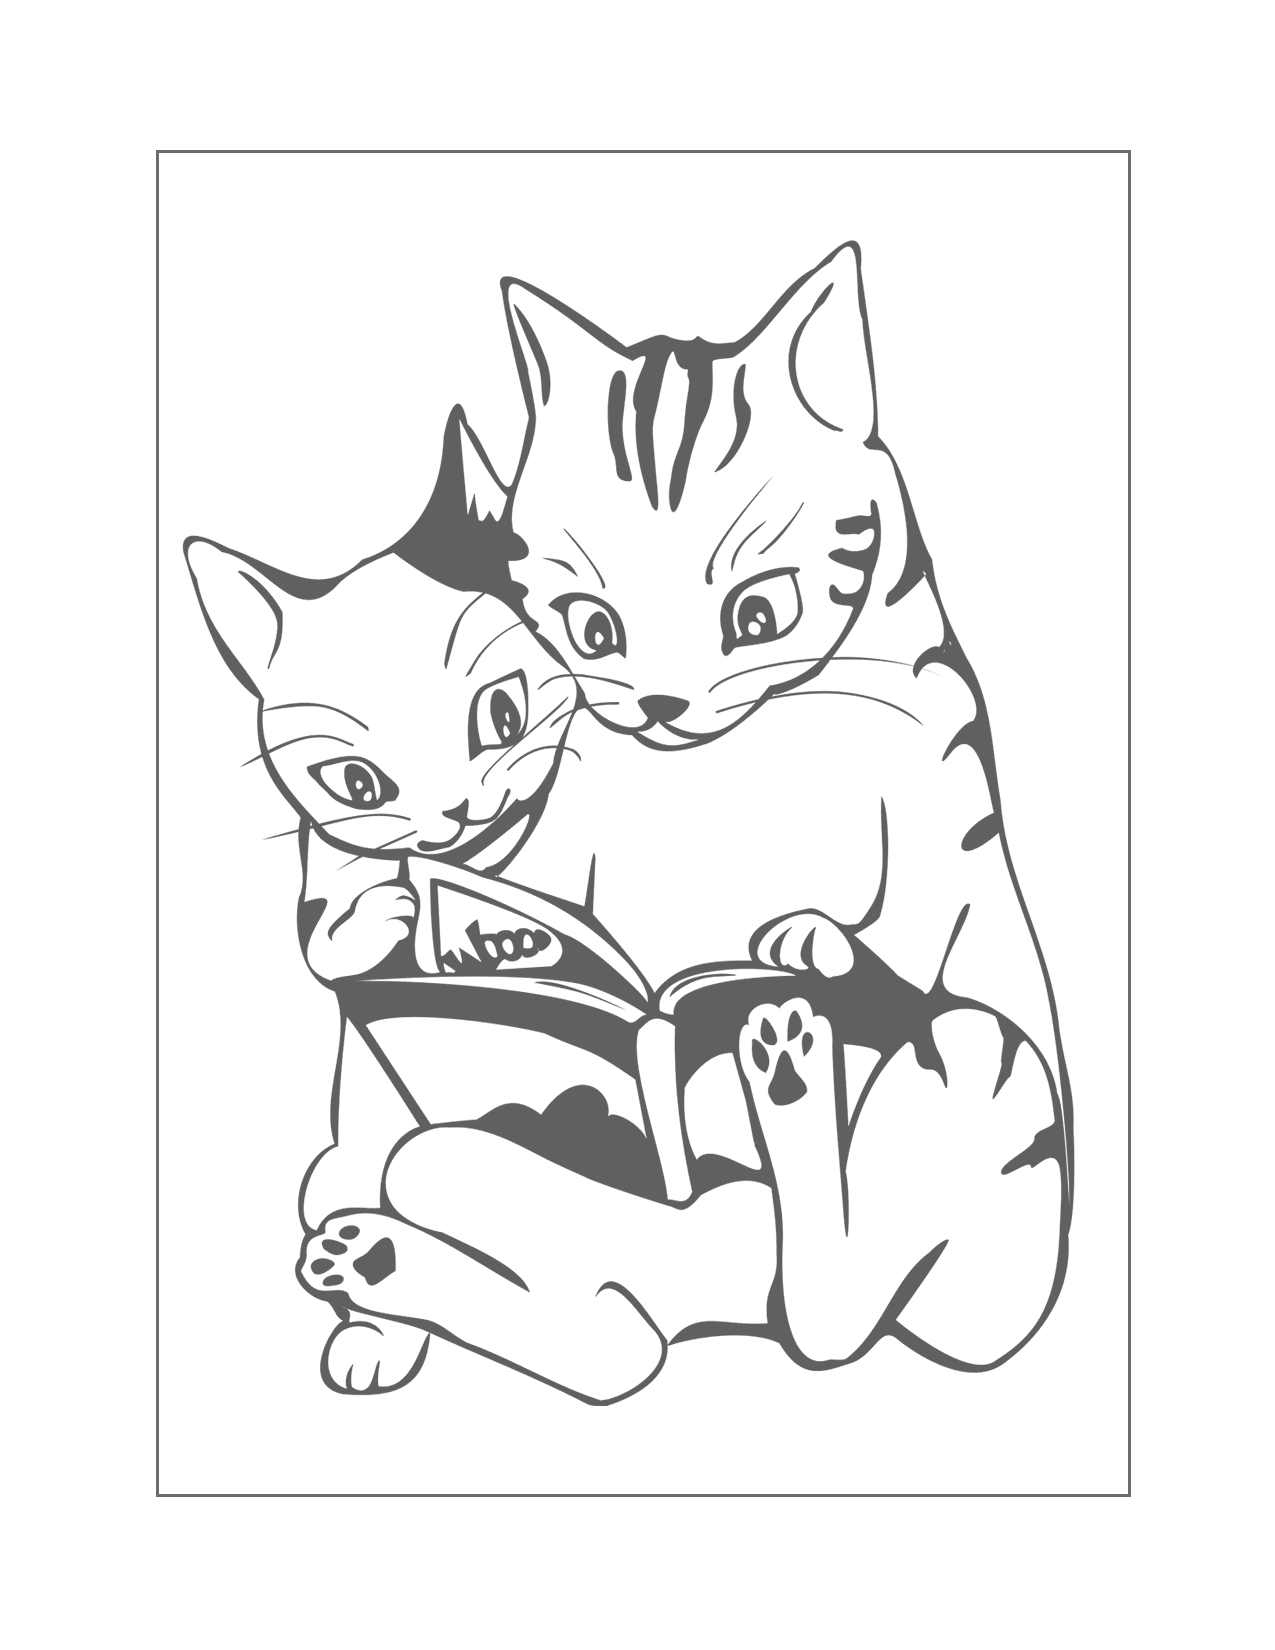 Kittens Reading A Book Coloring Page